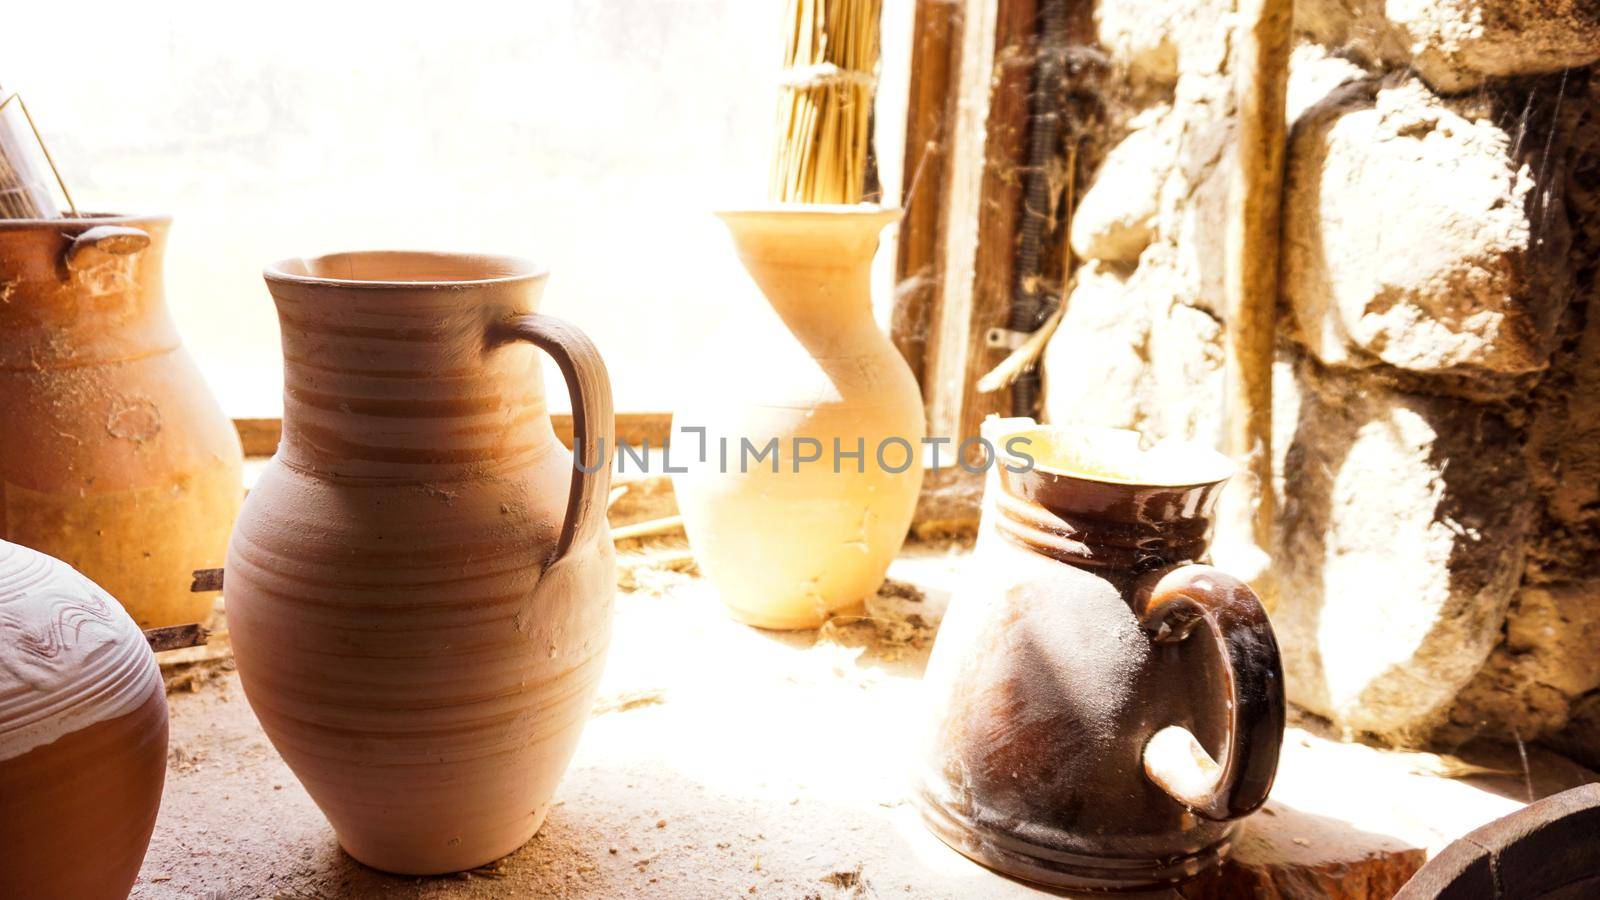 Old clay pot in an old room. Old dusty shelves in a pottery workshop. by natali_brill